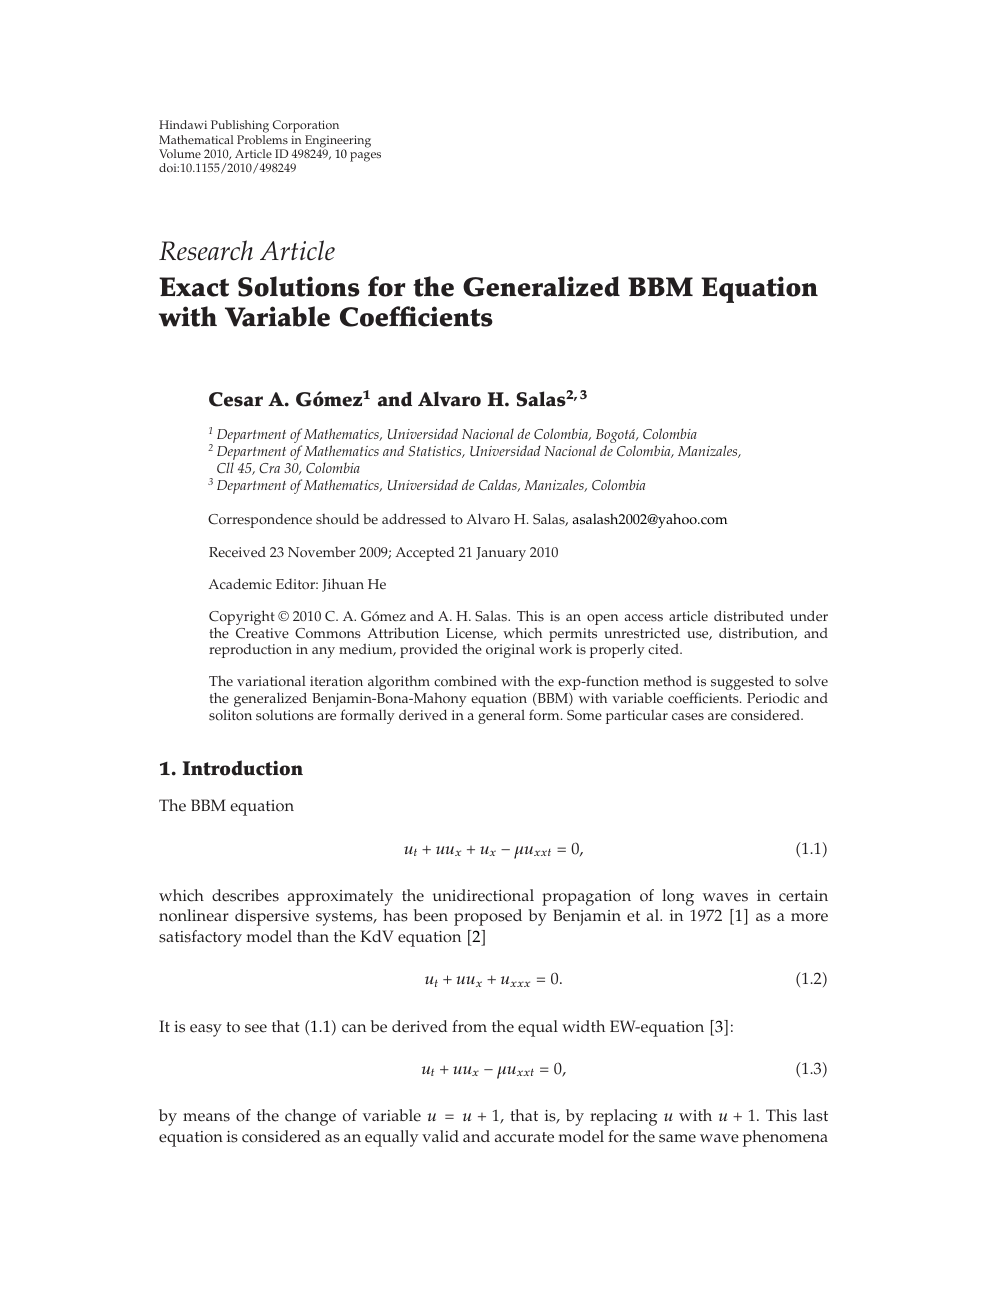 Exact Solutions For The Generalized m Equation With Variable Coefficients Topic Of Research Paper In Mathematics Download Scholarly Article Pdf And Read For Free On Cyberleninka Open Science Hub